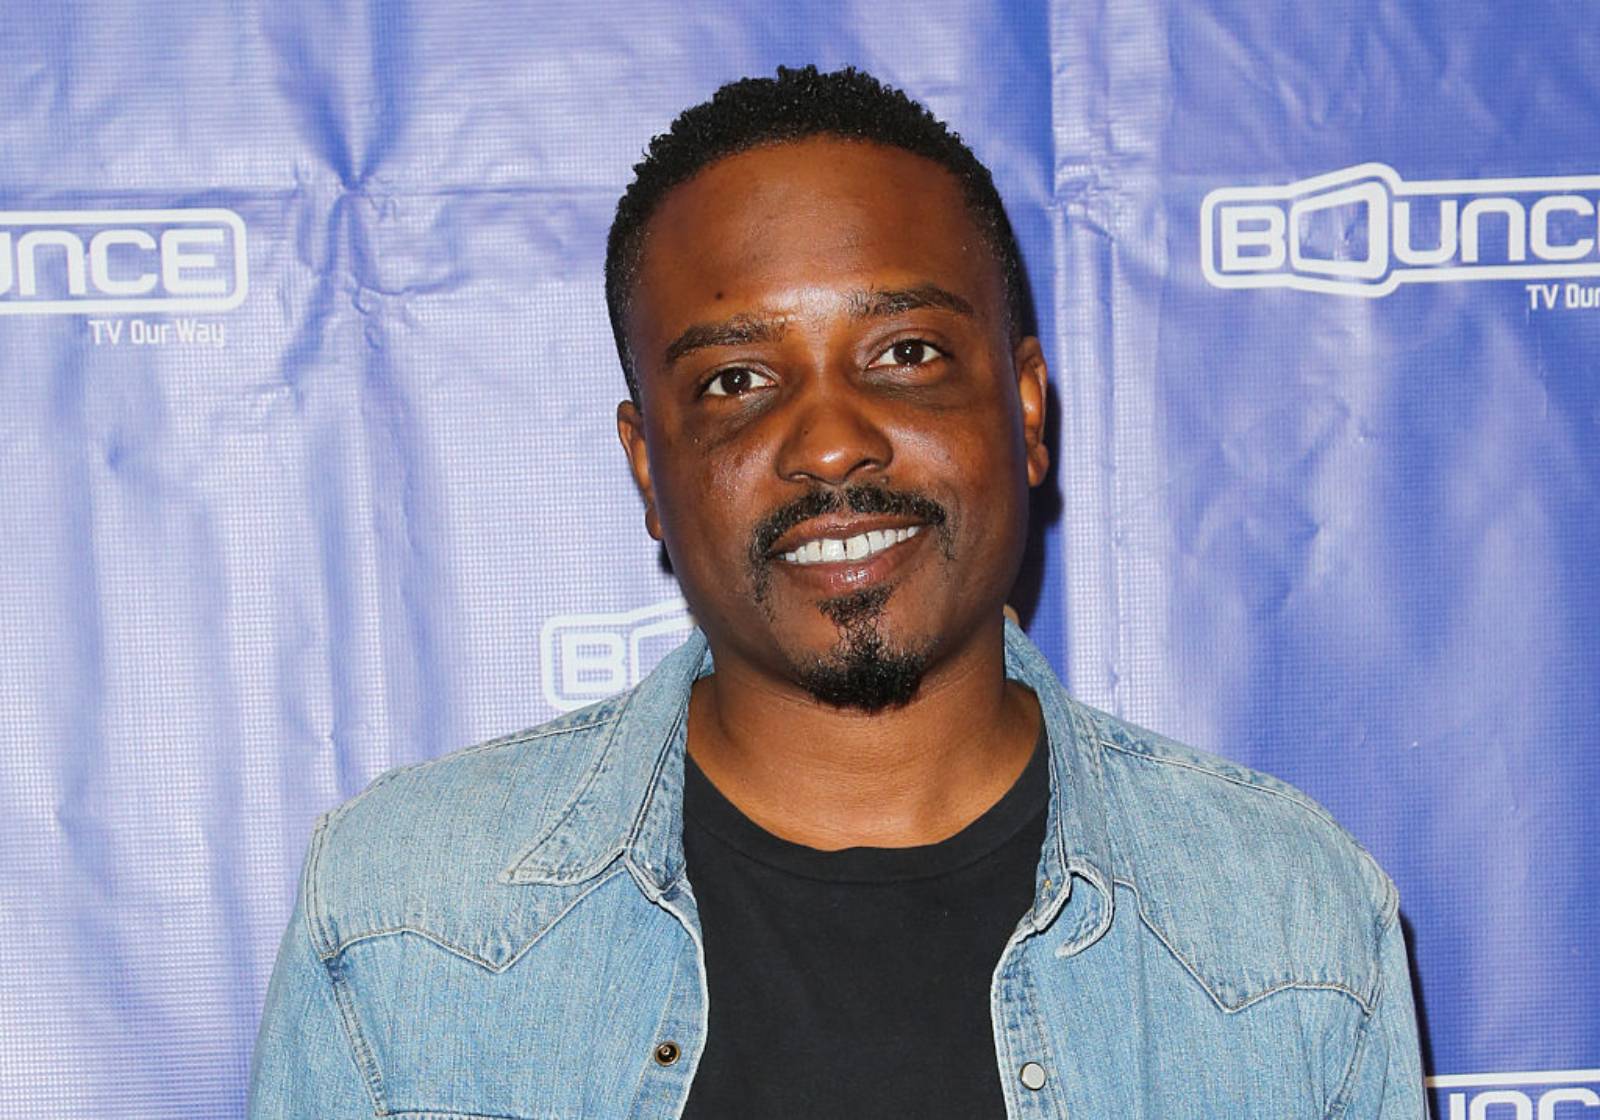 Jason Weaver attends the "Family Time" Season 3 wrap party on June 9, 2015 in Encino, California. (Photo by Paul Archuleta/FilmMagic)